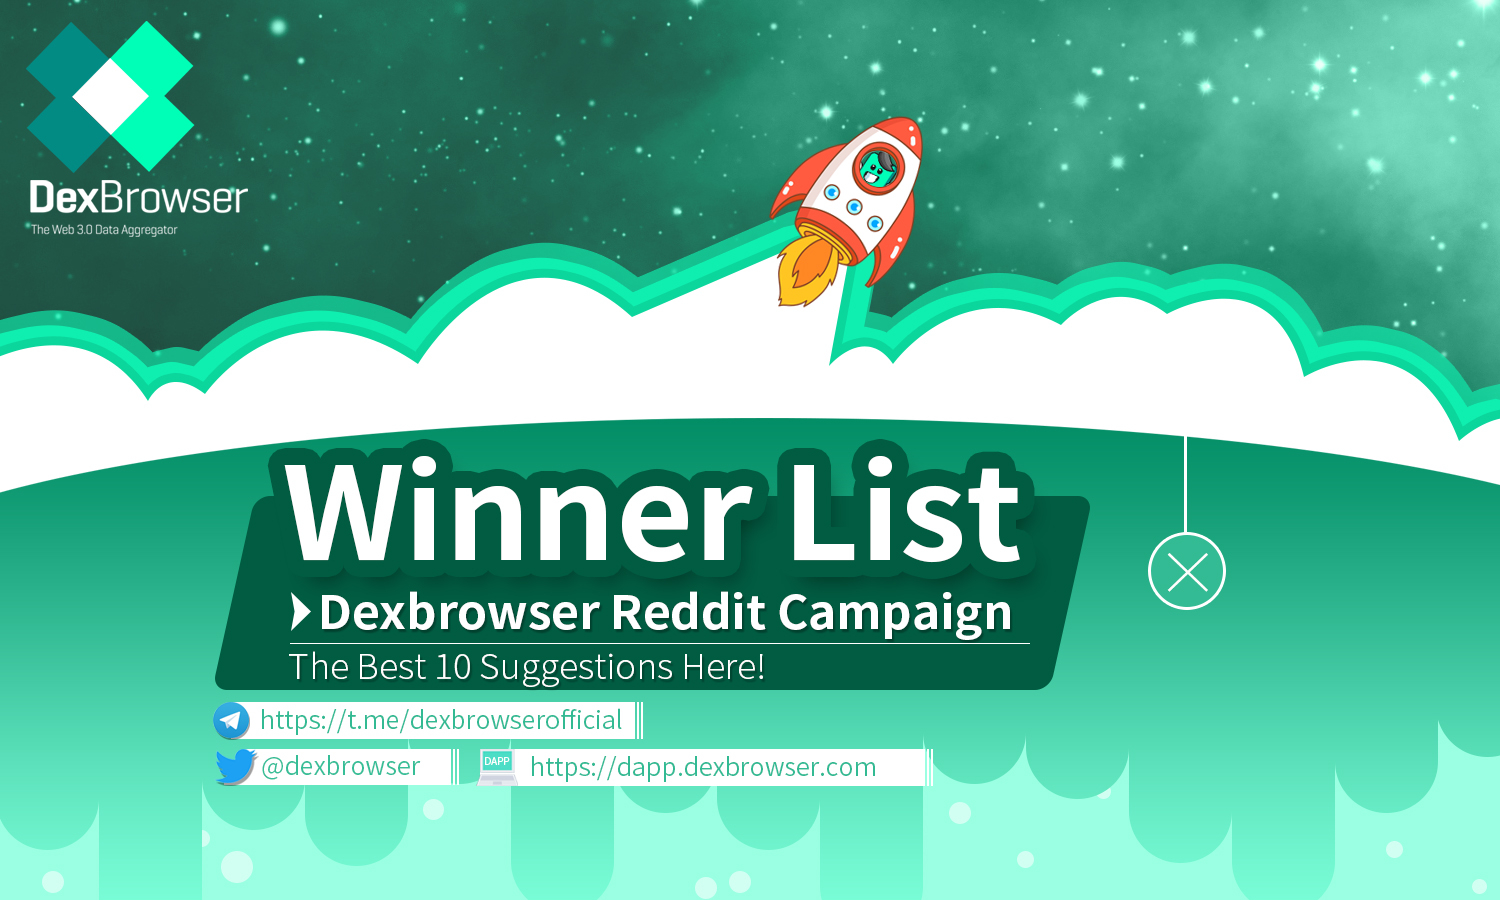 Winners of Dexbrowser Reddit Campaign Announced! The Best 10 Suggestions Here